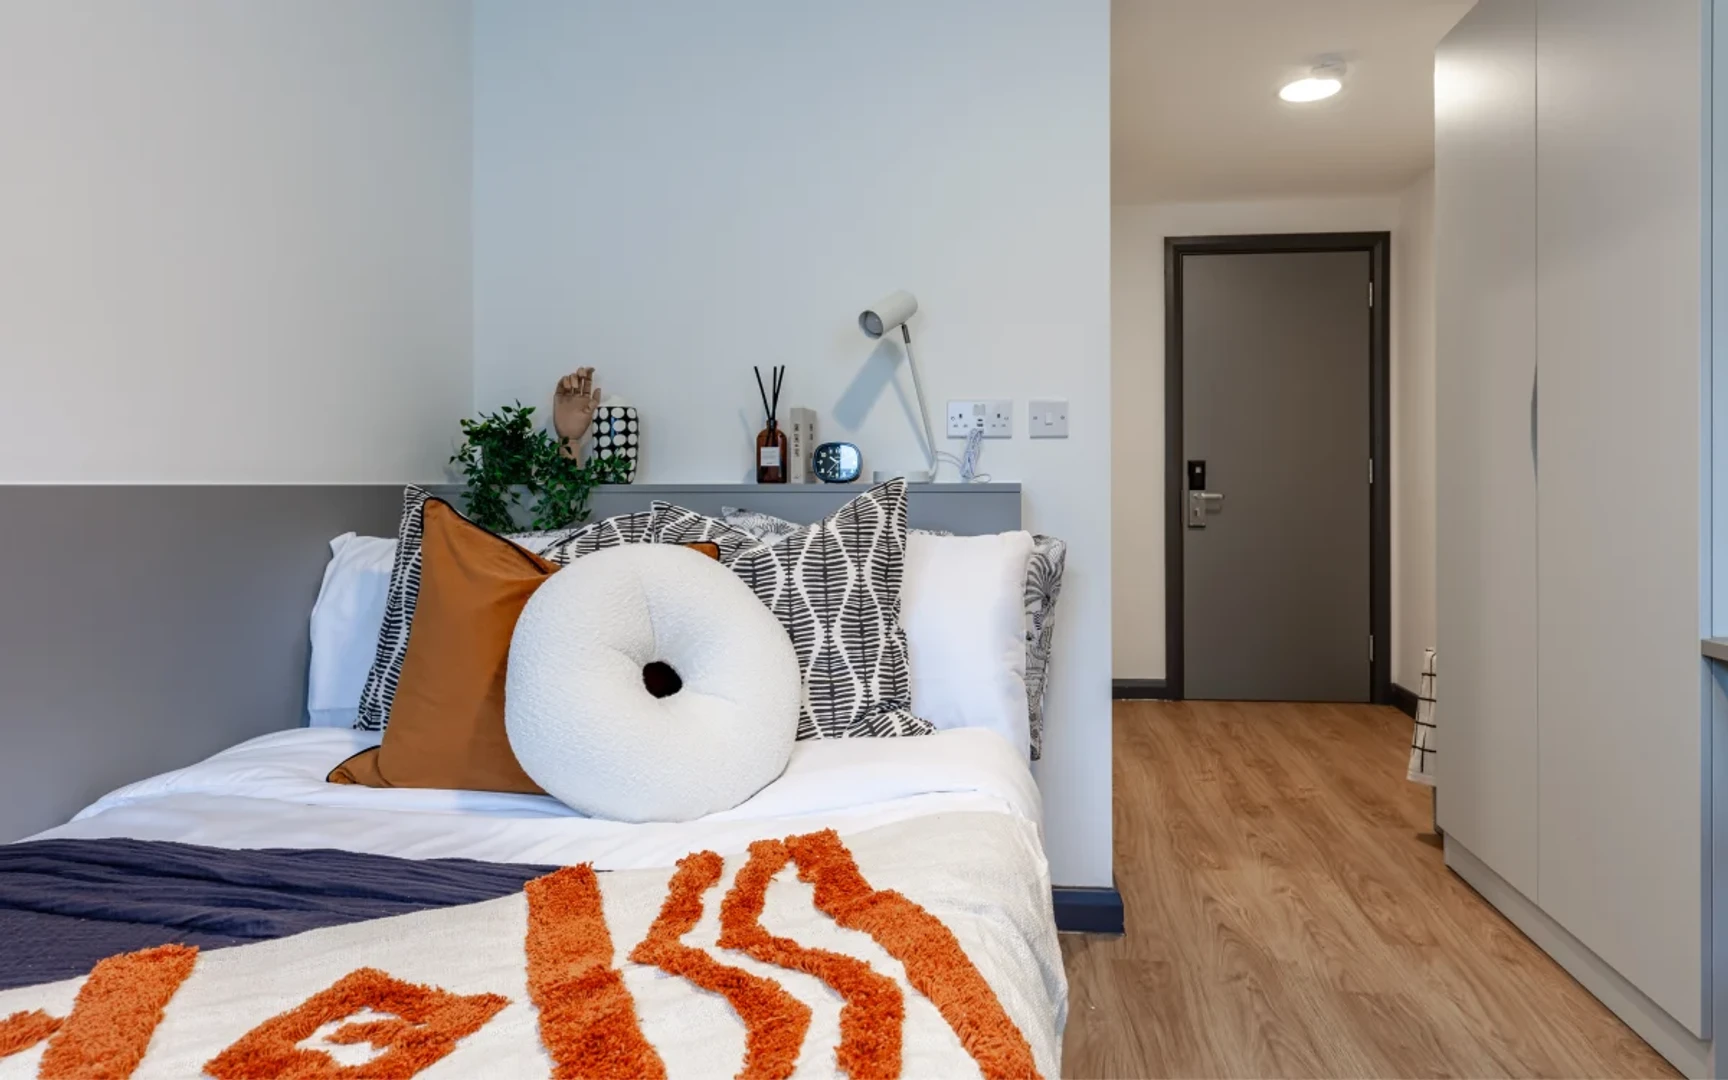 Renting rooms by the month in Bath